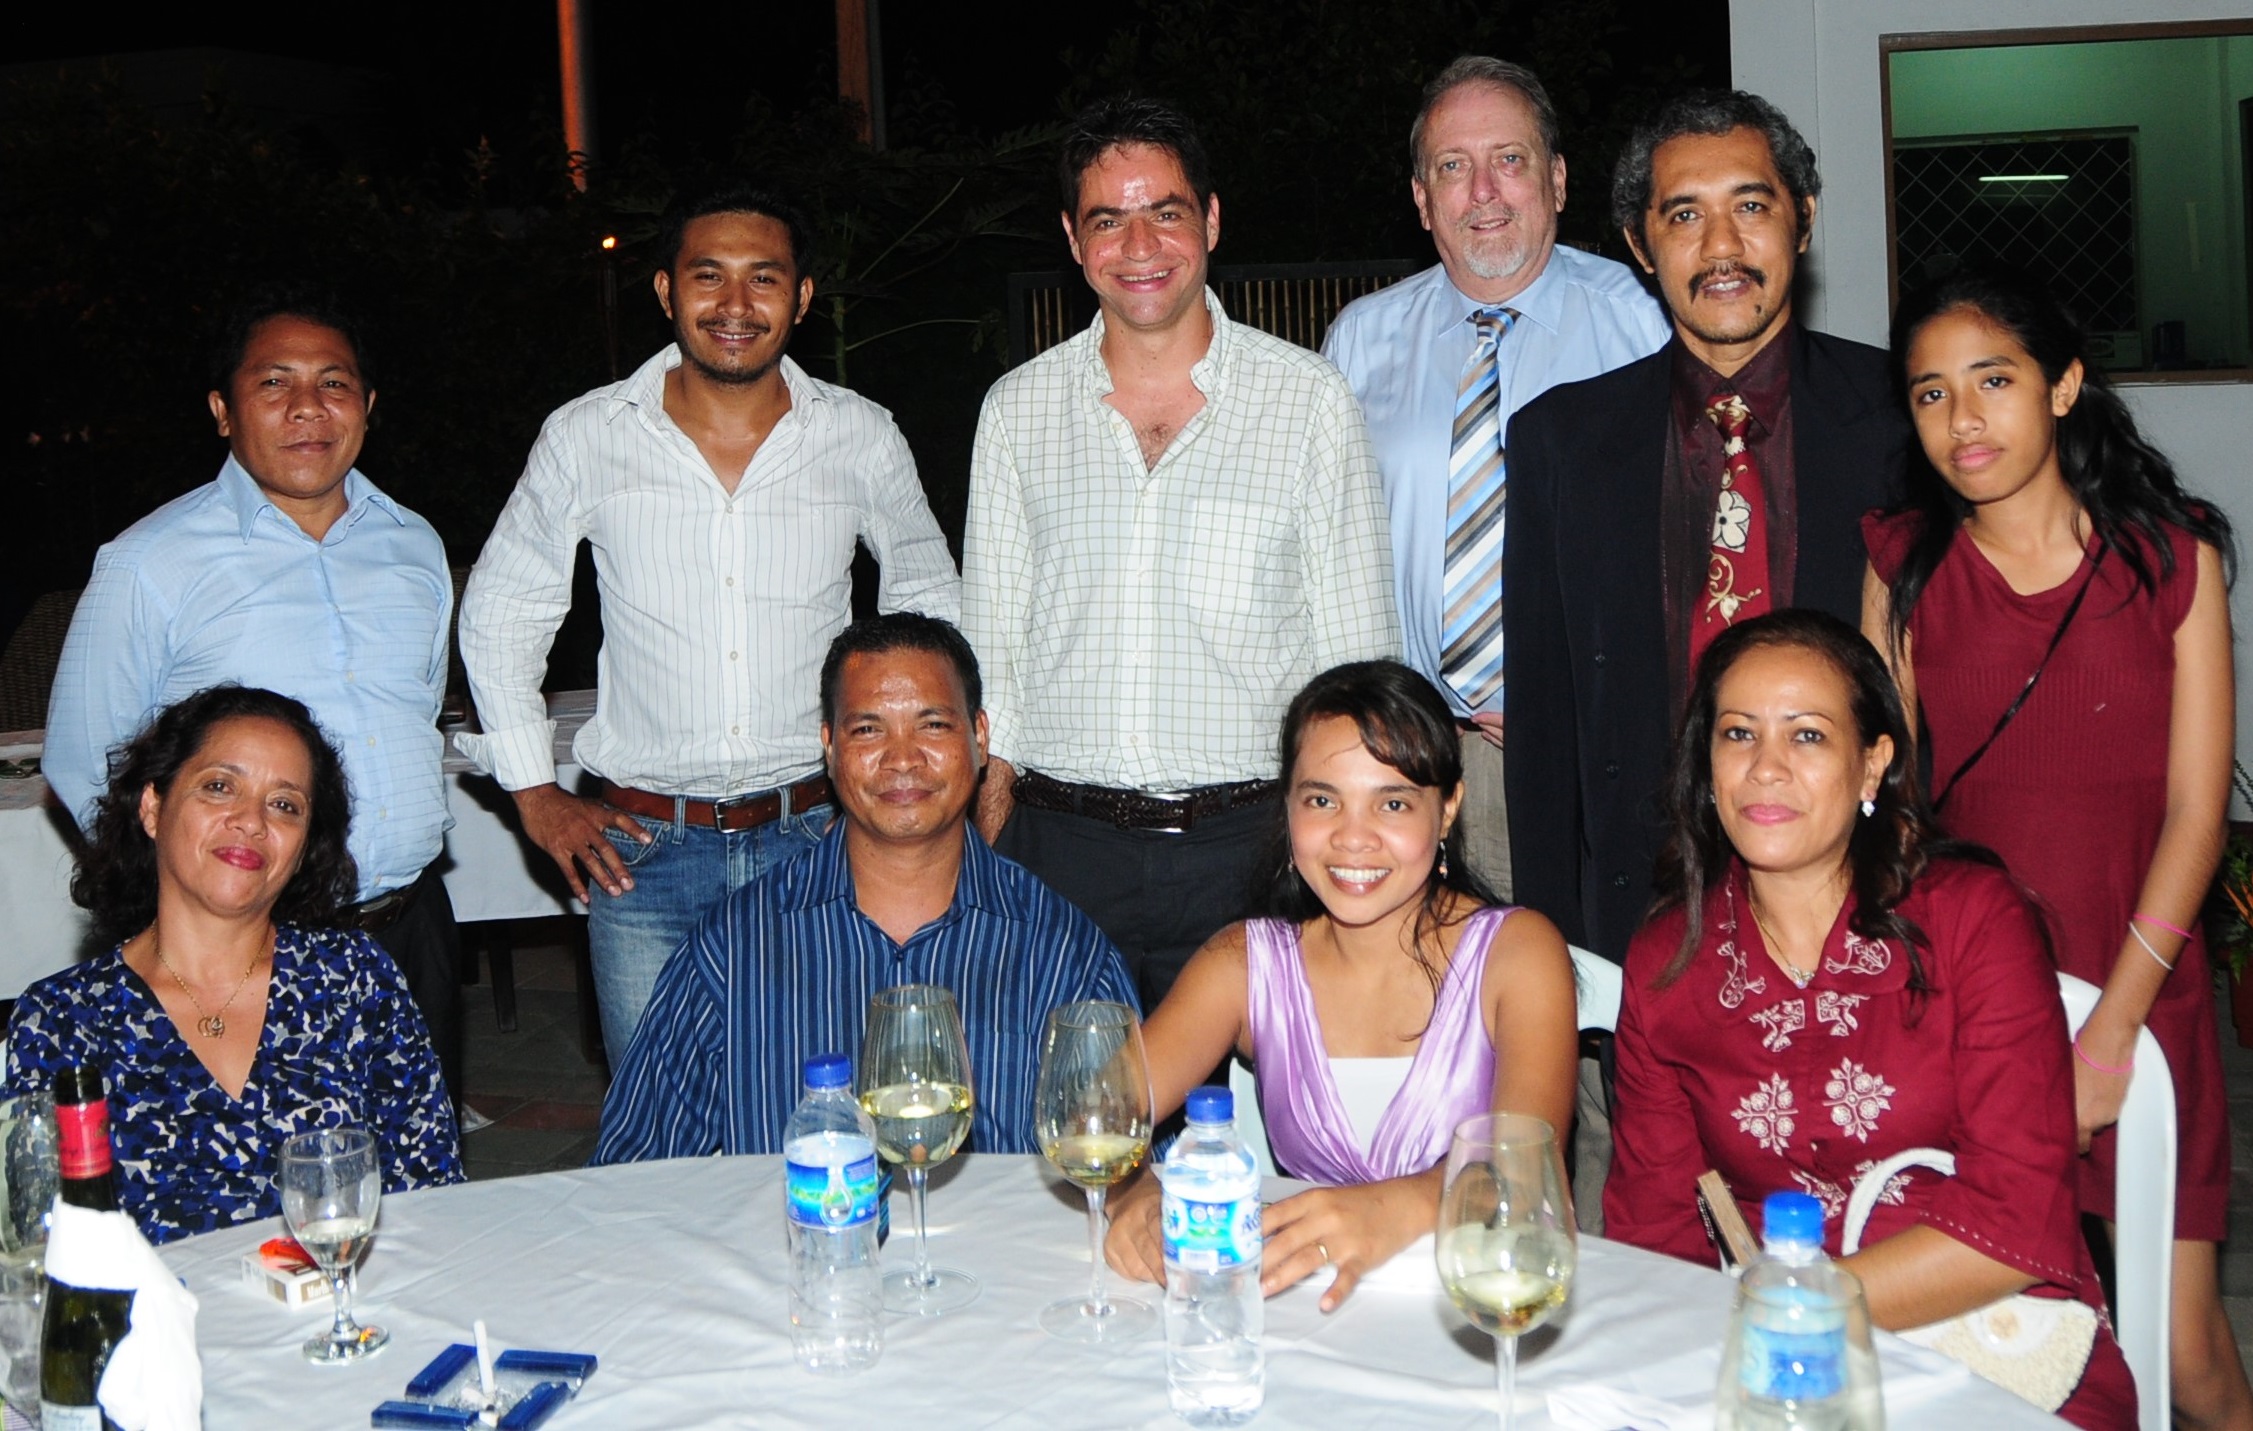 Ray Murray (third from right) at the author's wedding in Dili in 2010